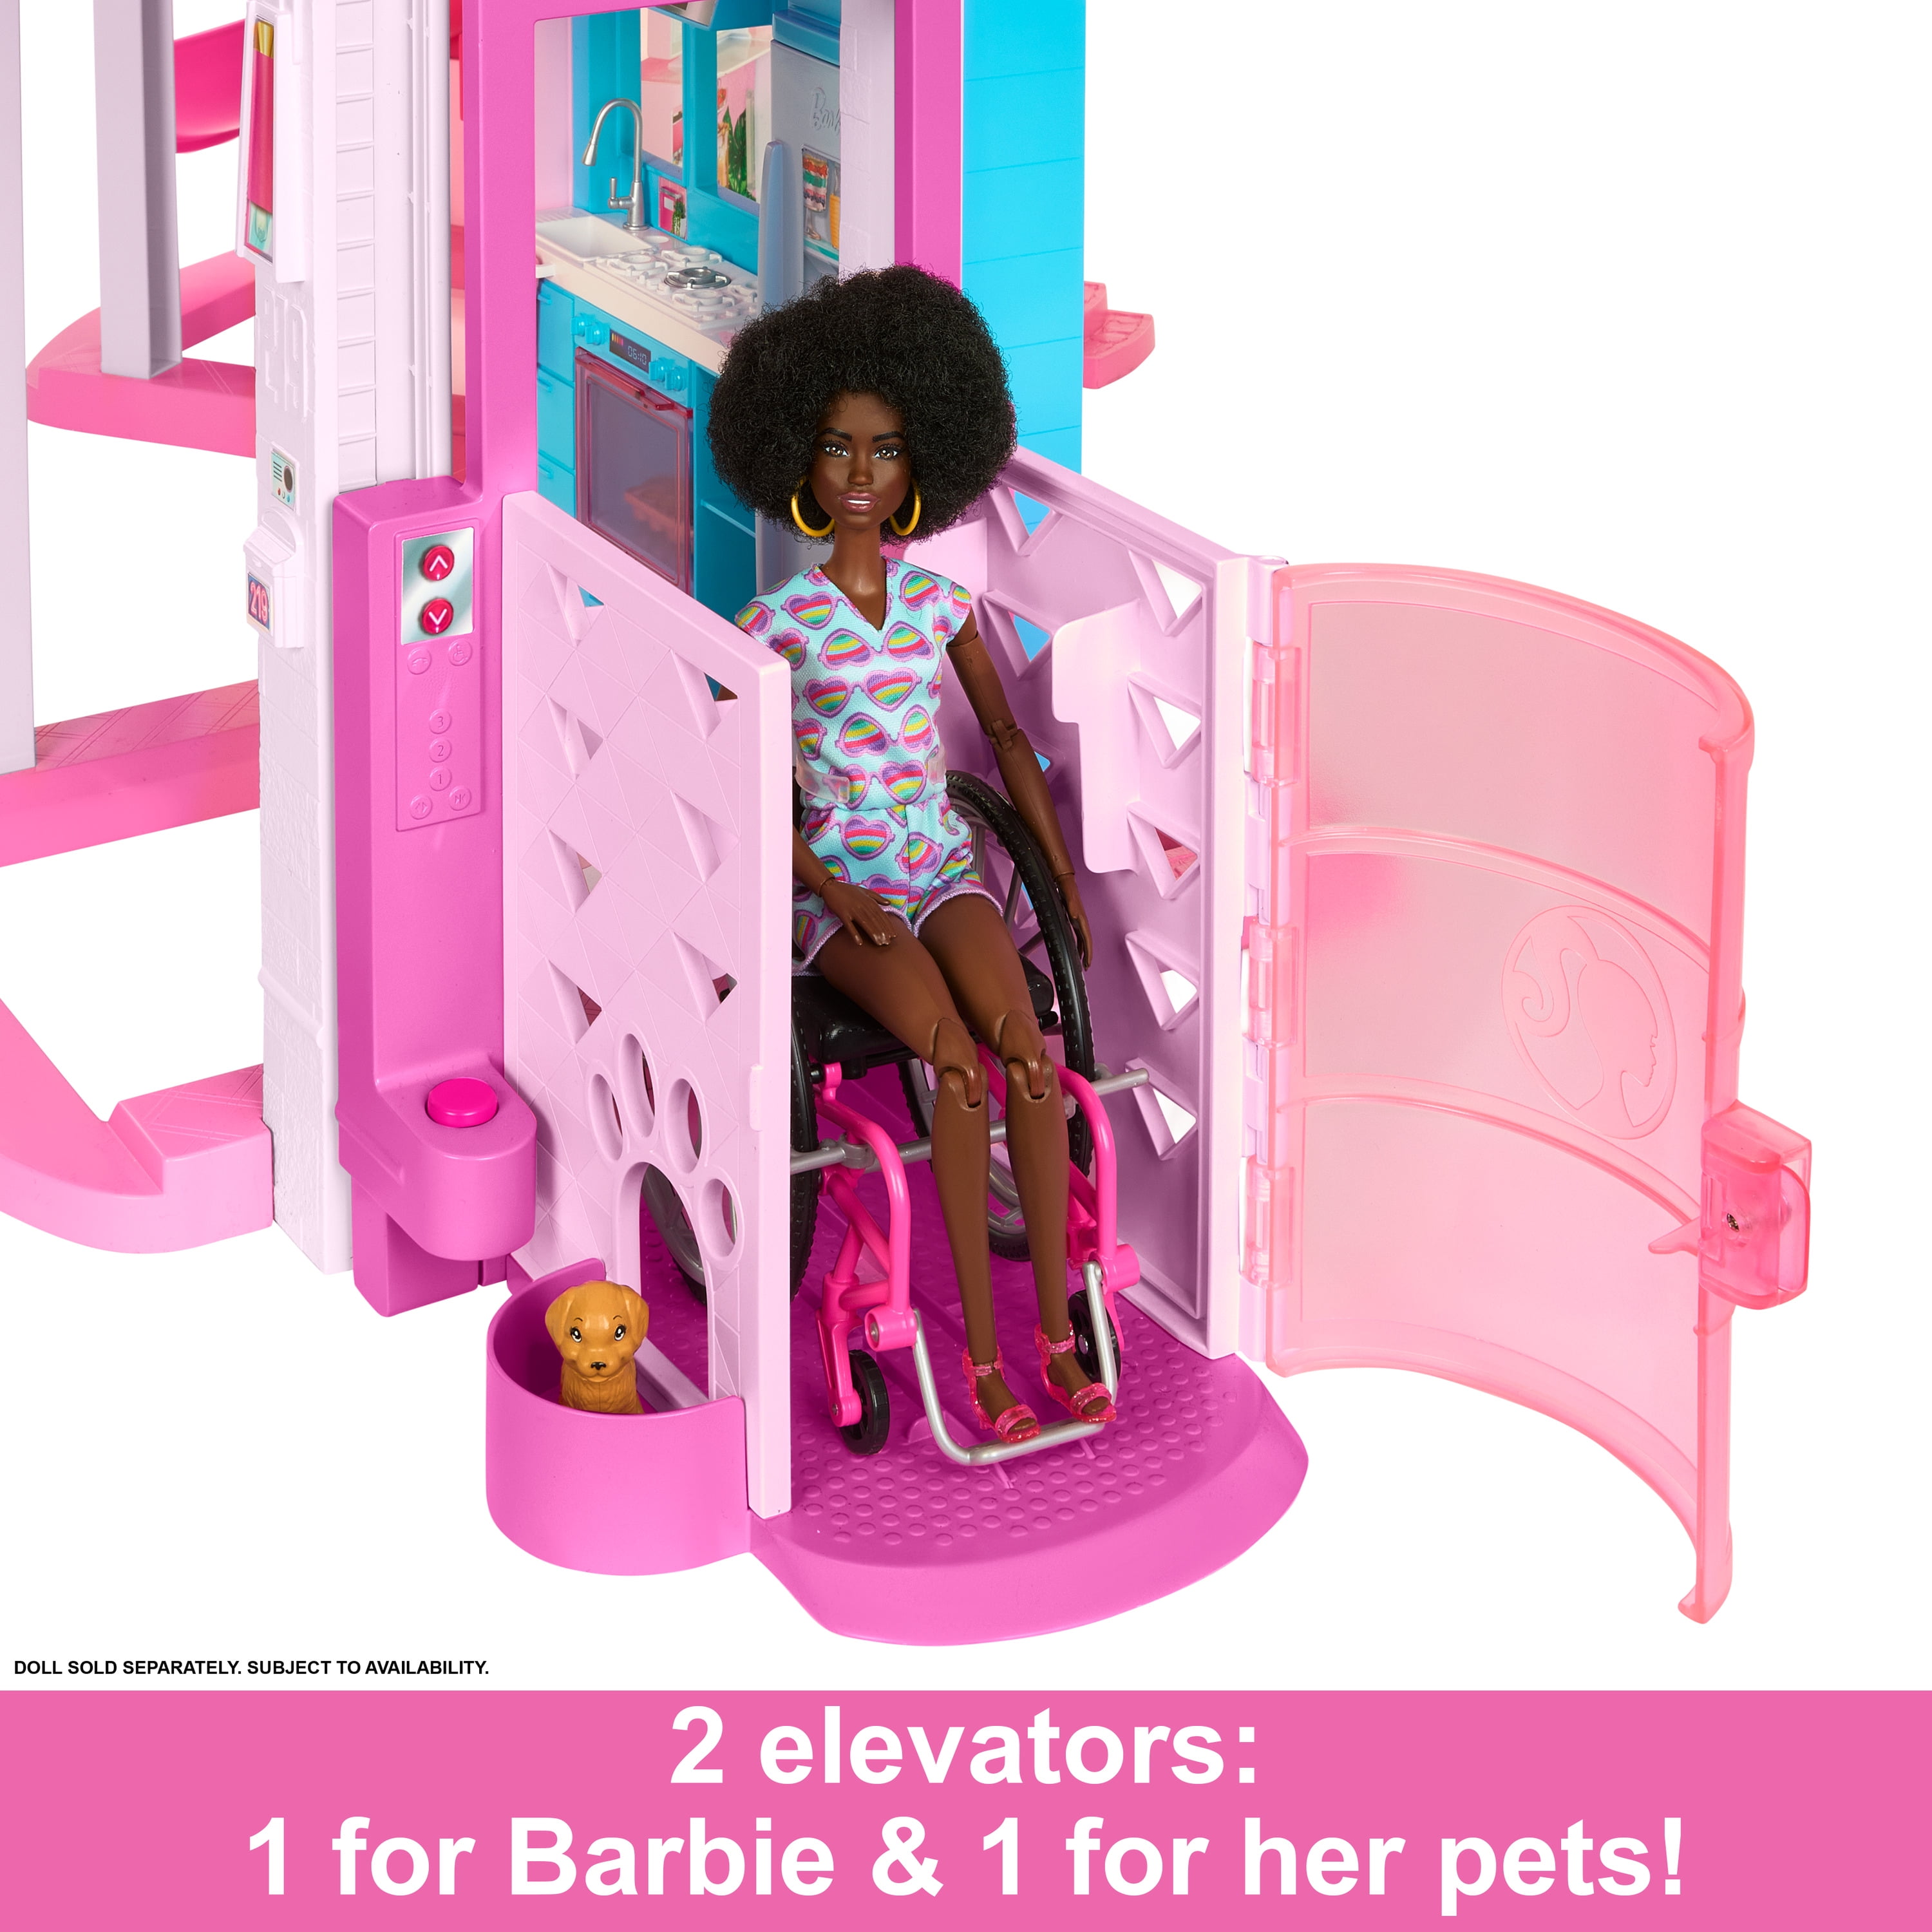 Barbie Dreamhouse Portable Doll HousePlastic in Pink, Size 30.0 H